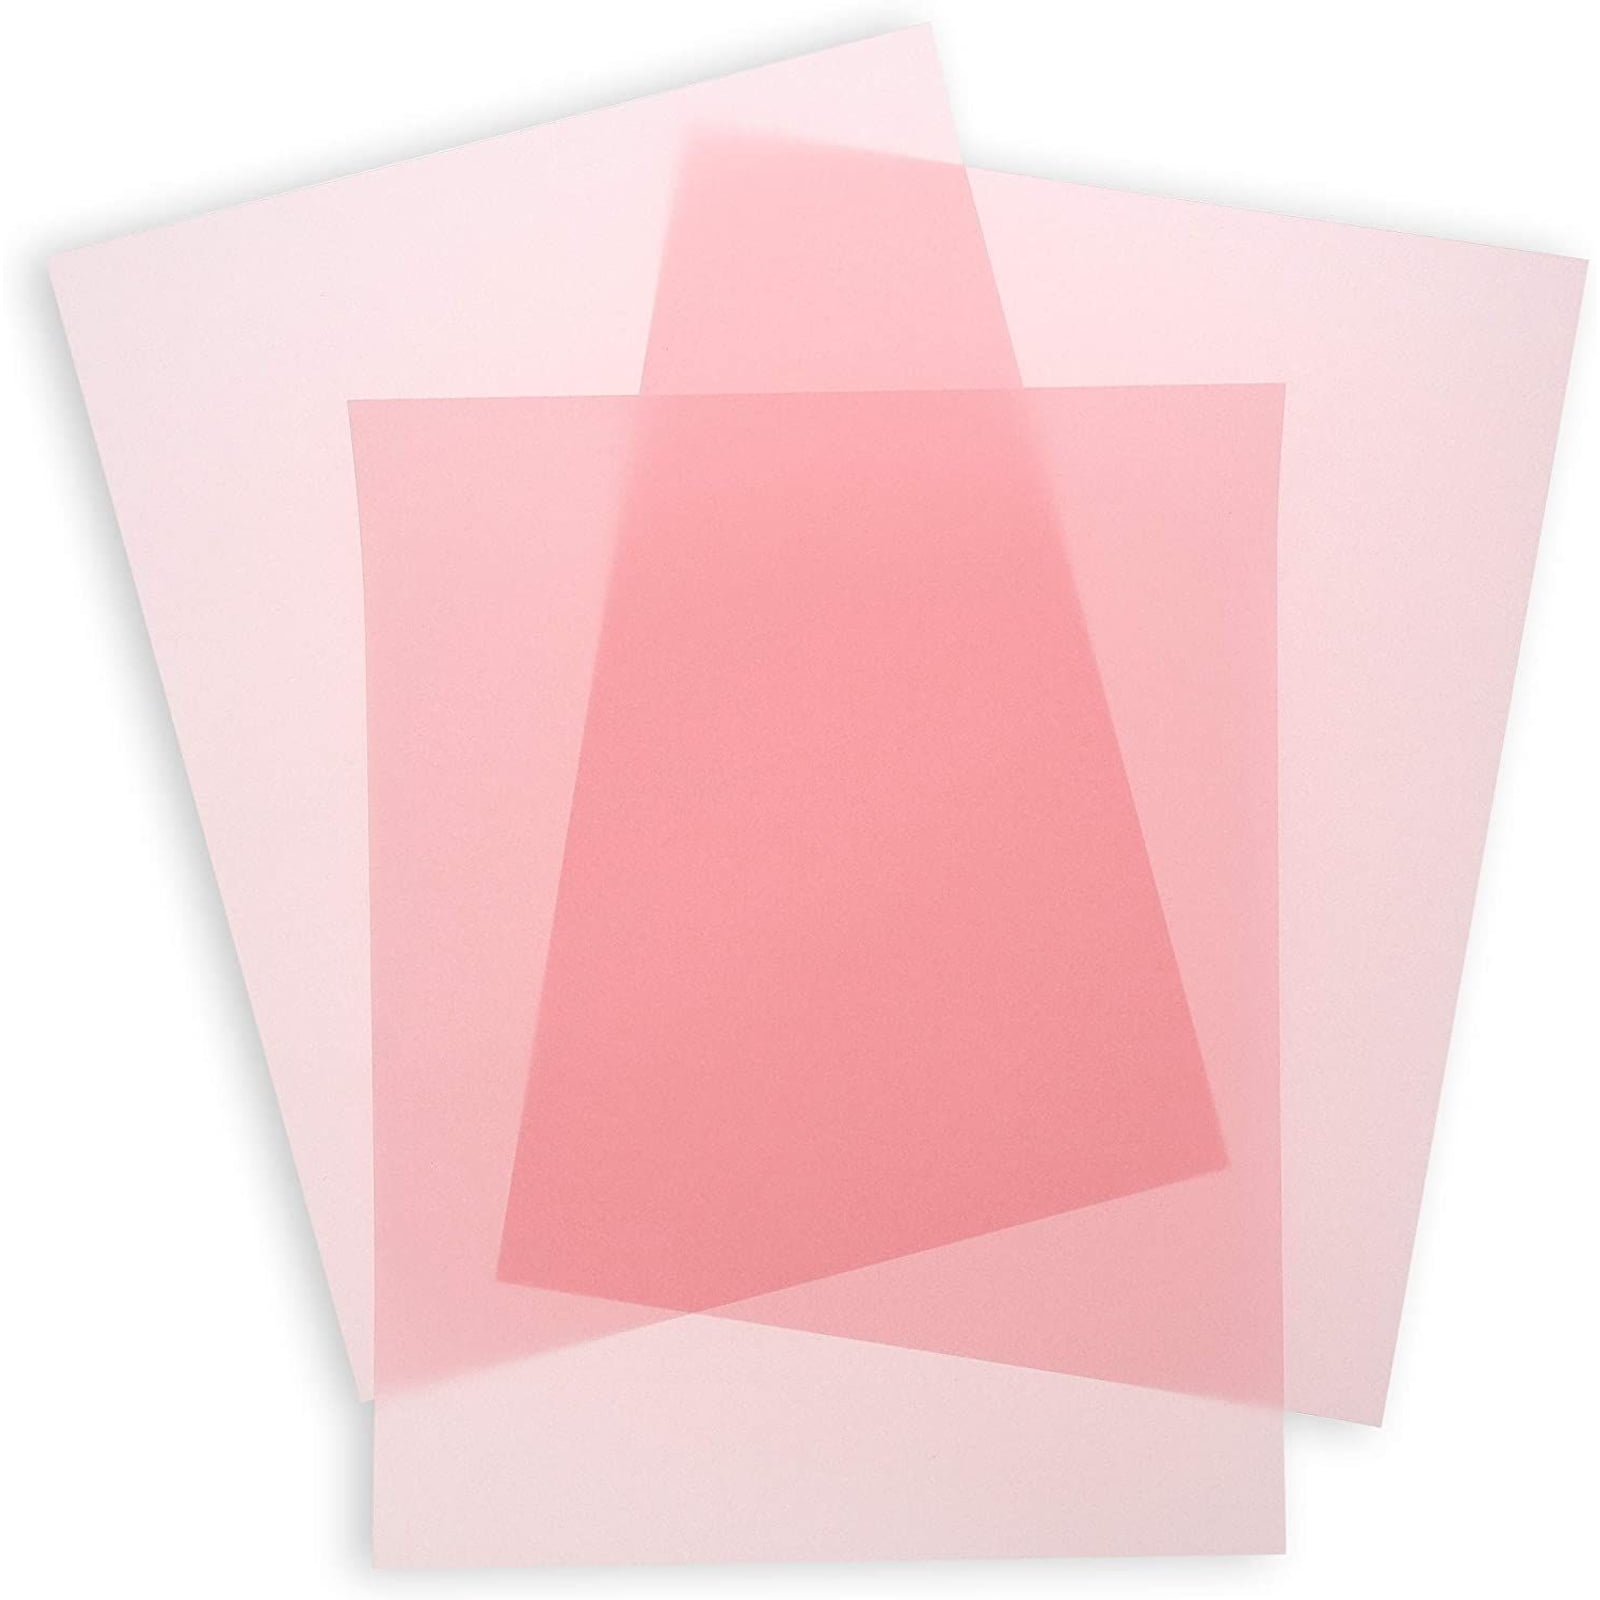 Pink Vellum Paper for Invitations and Tracing (8.5 x 11 in, 50 Sheets ...